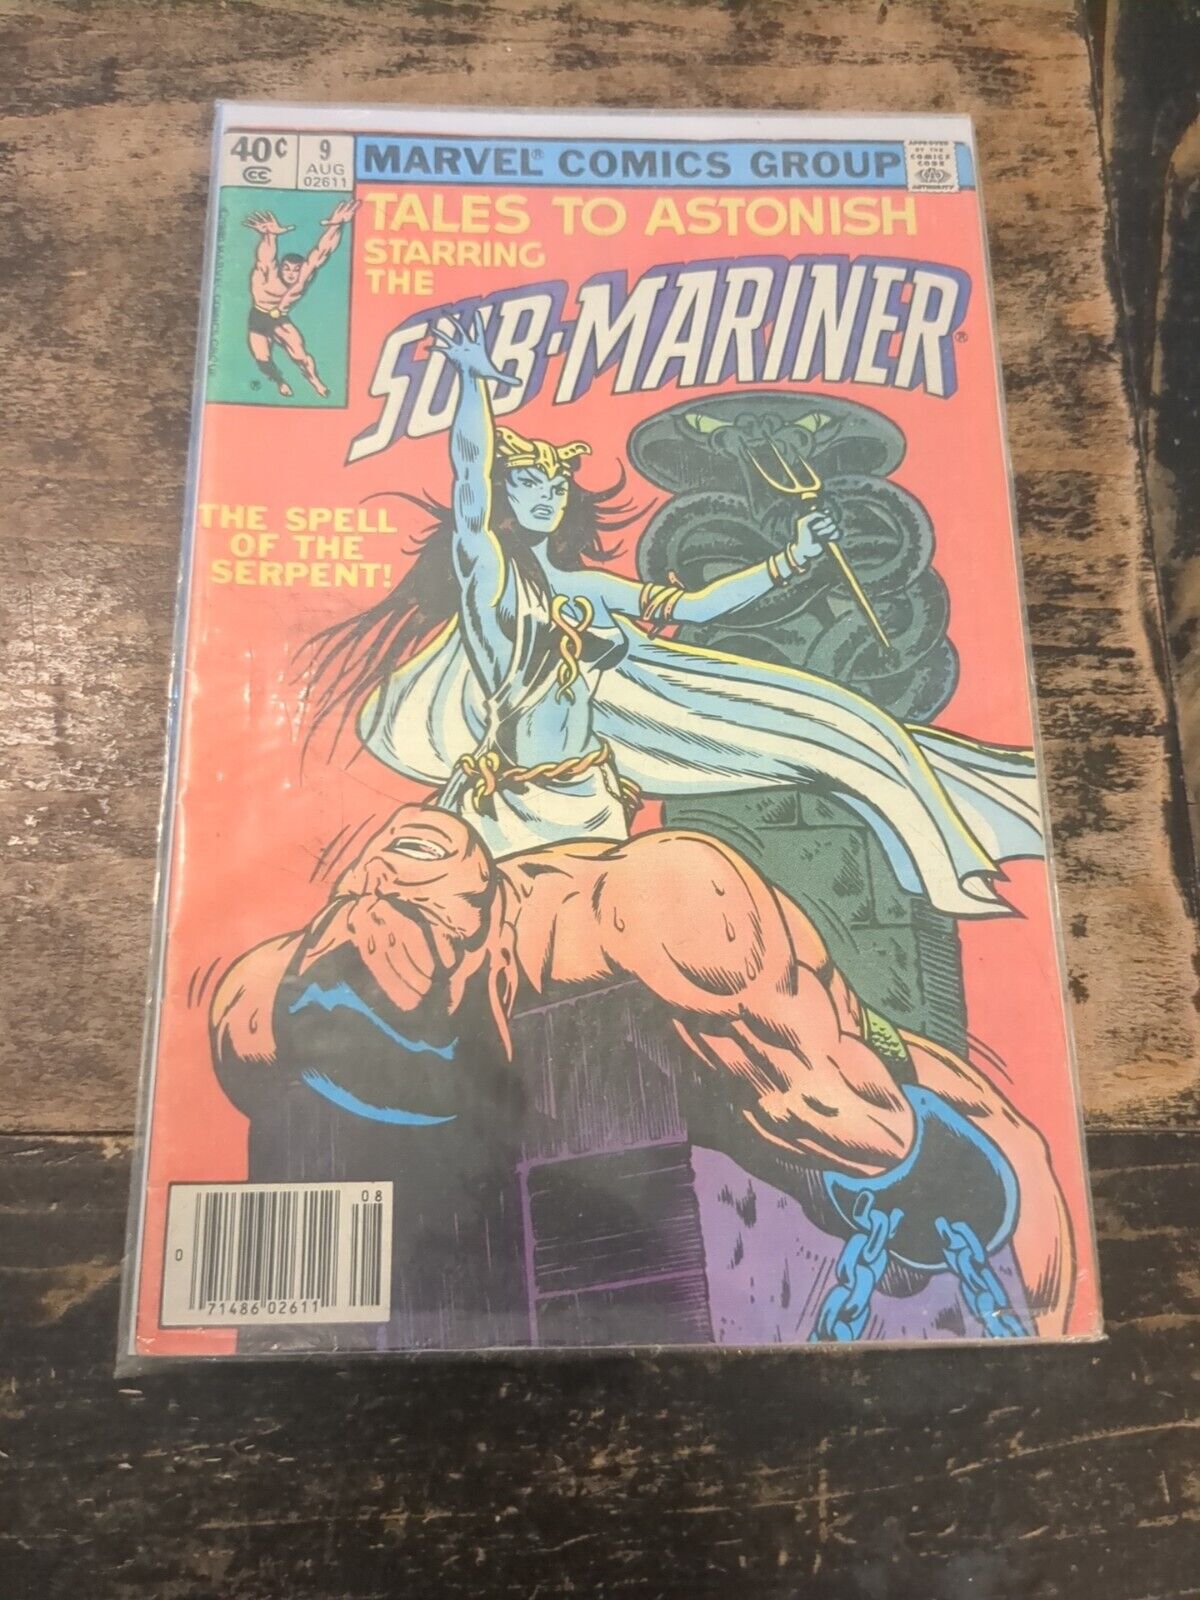 Tales to Astonish SUB-MARINER #9 (Aug 1980) VG-FN Condition Comic - The Serpent